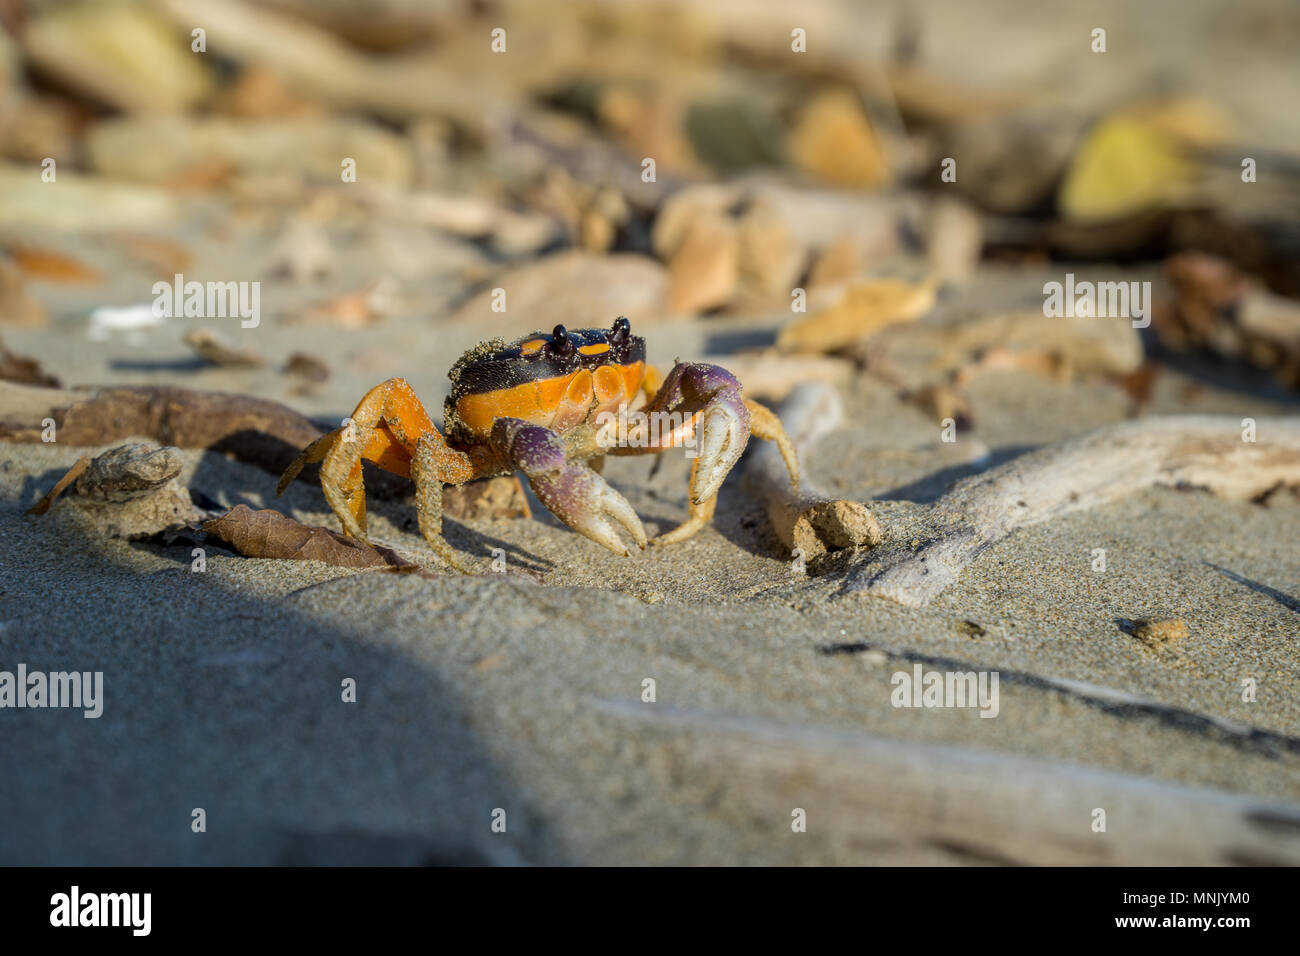 Friendly, smiling crab showing its claws on the beach. Stock Photo